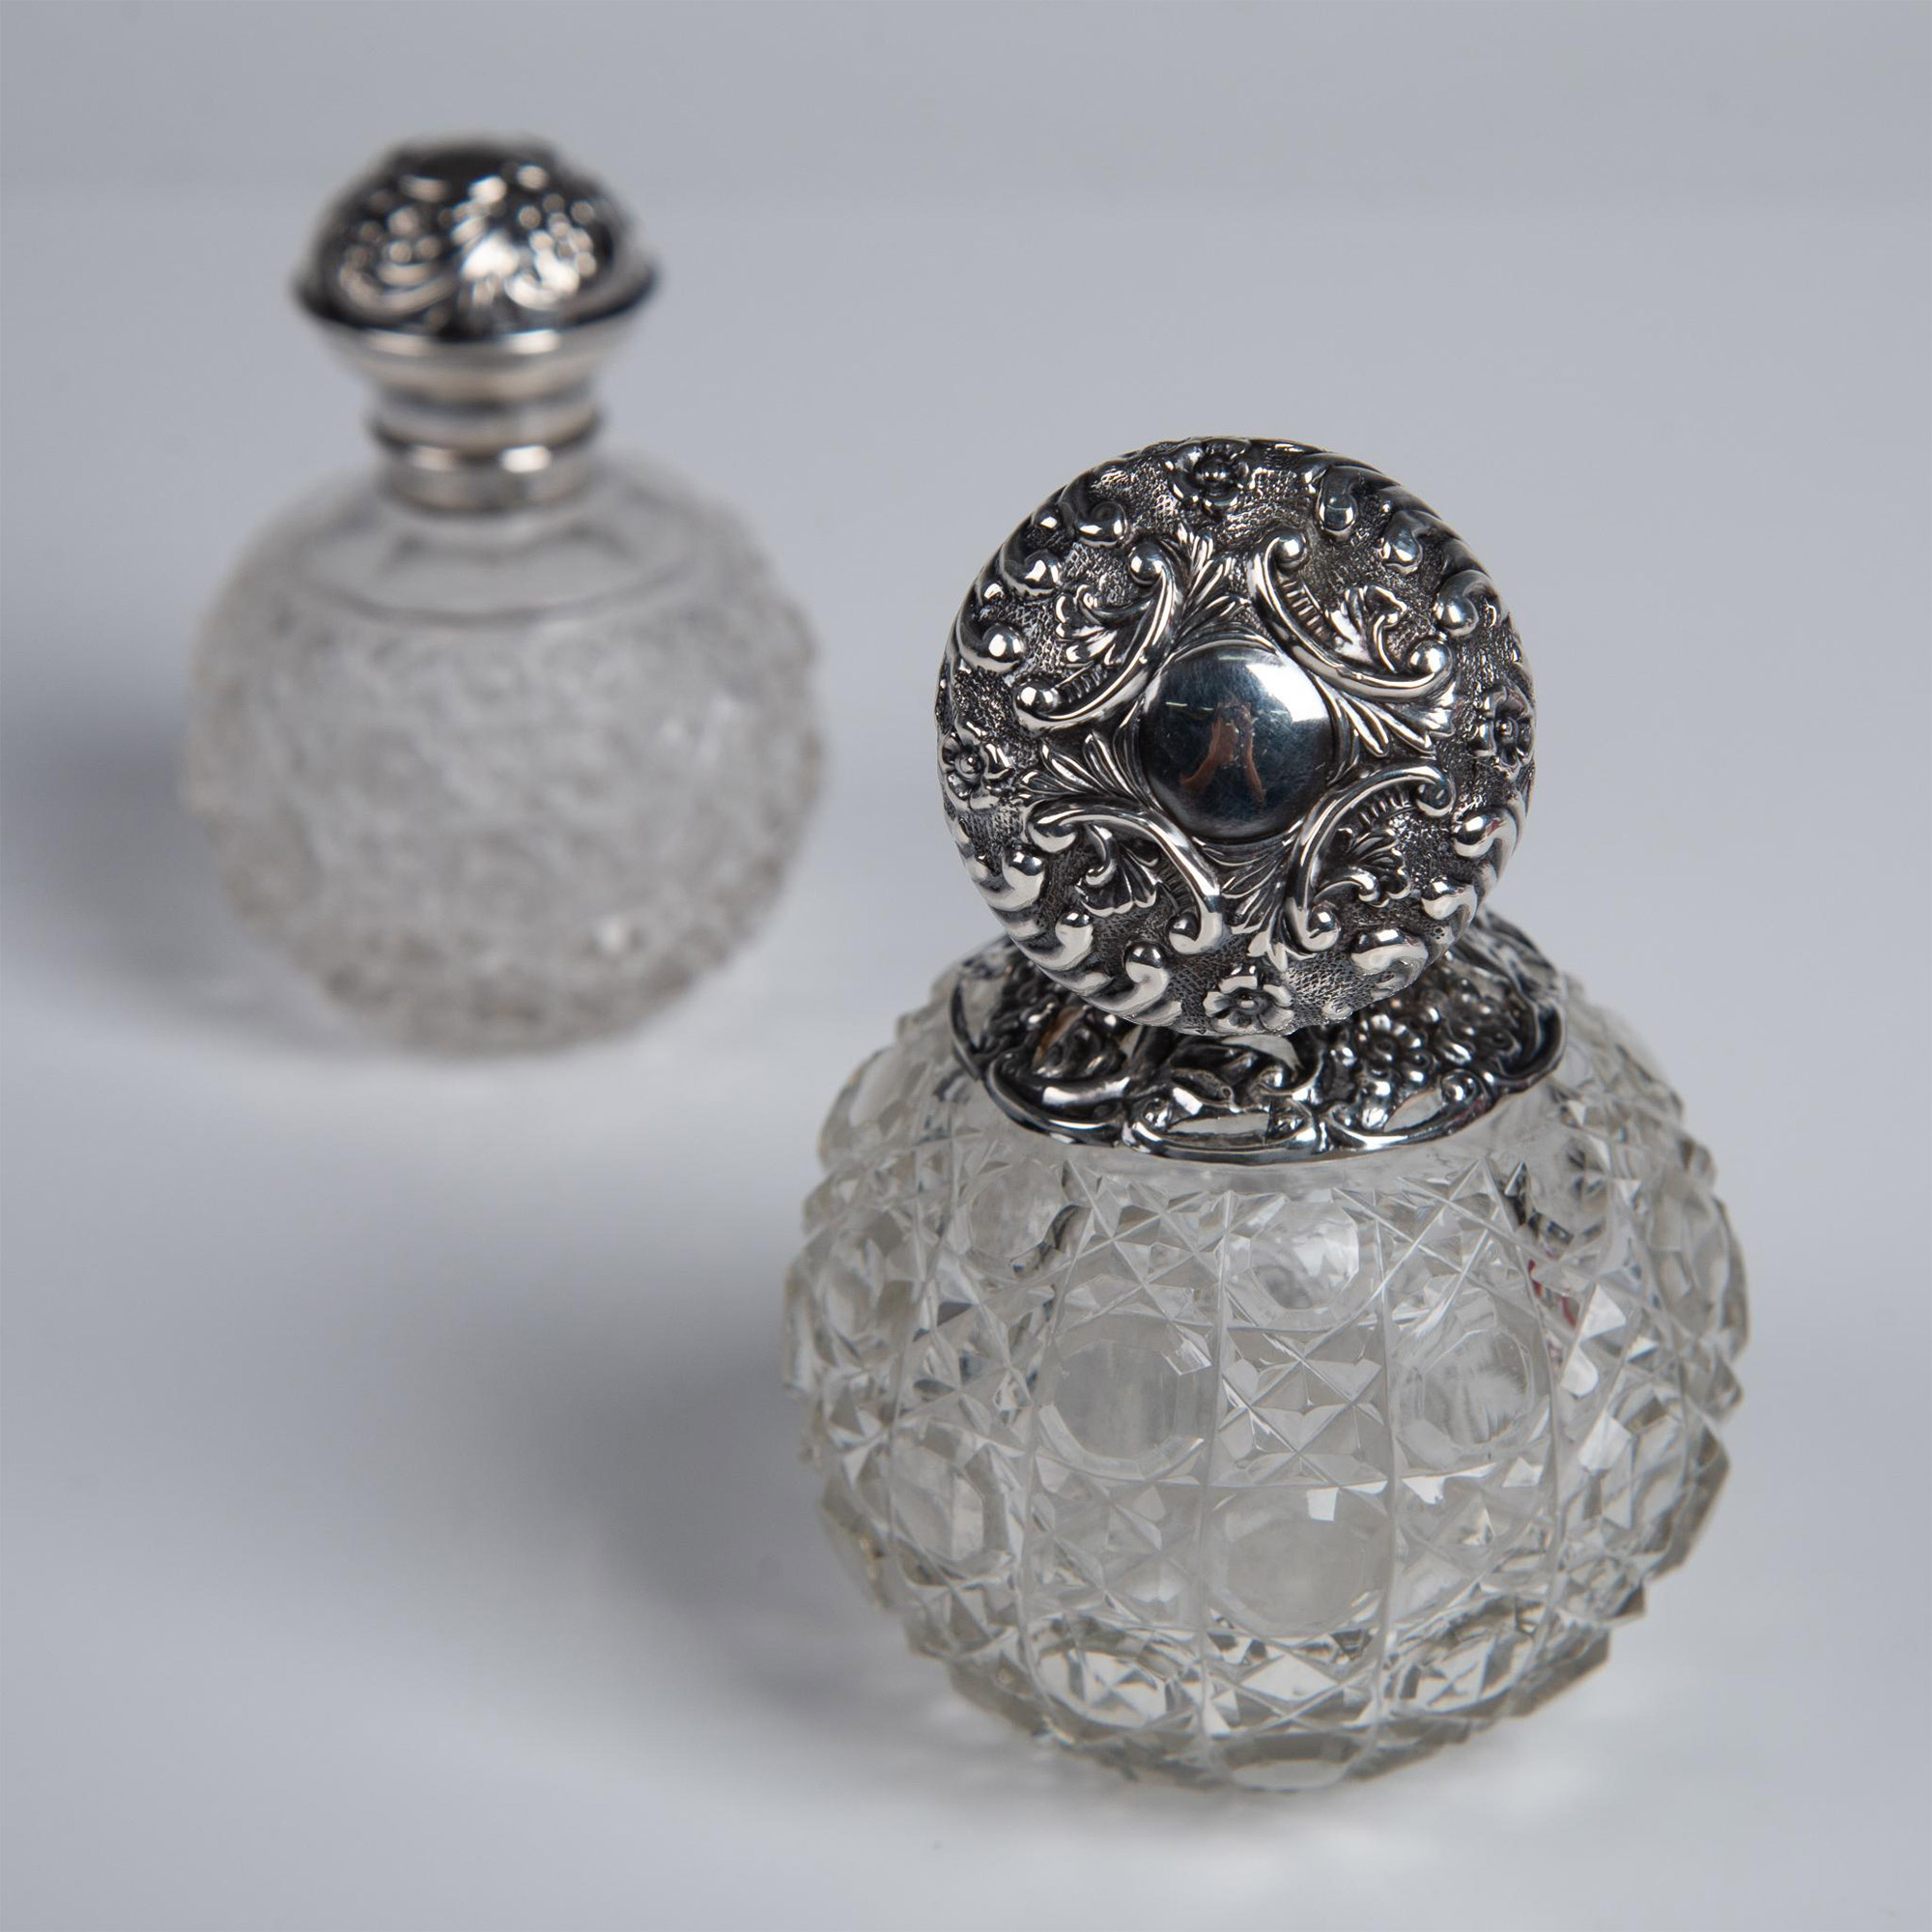 2pc Antique English Cut Crystal and Sterling Scent Bottles - Image 3 of 4